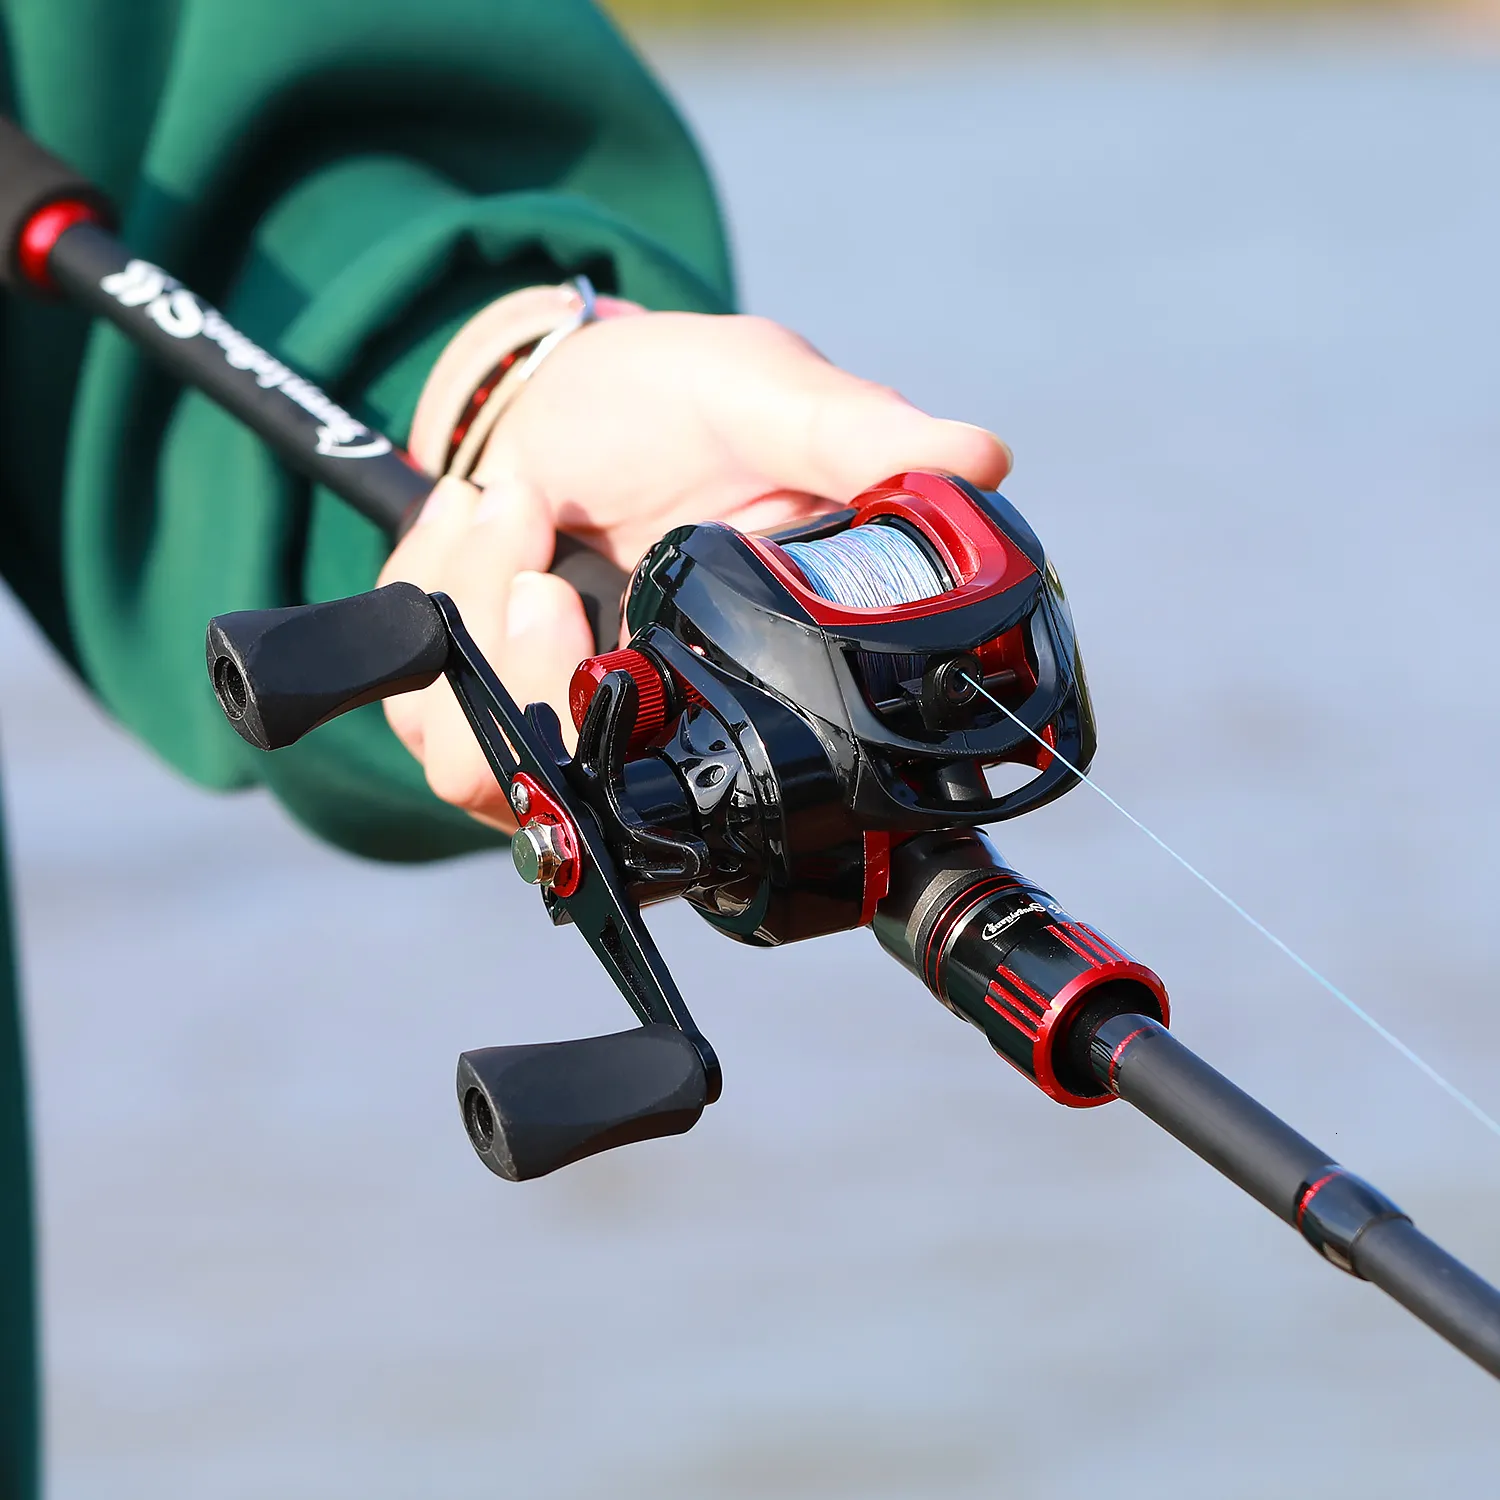 Sougayilang Best Boat Spinning Rod Set Carbon Fiber Reel And Rod Set, Max  Drag 8kg For Bass, Pike, And Trout Tackle 18m/21m Lengths Available 230522  From Fan06, $80.67